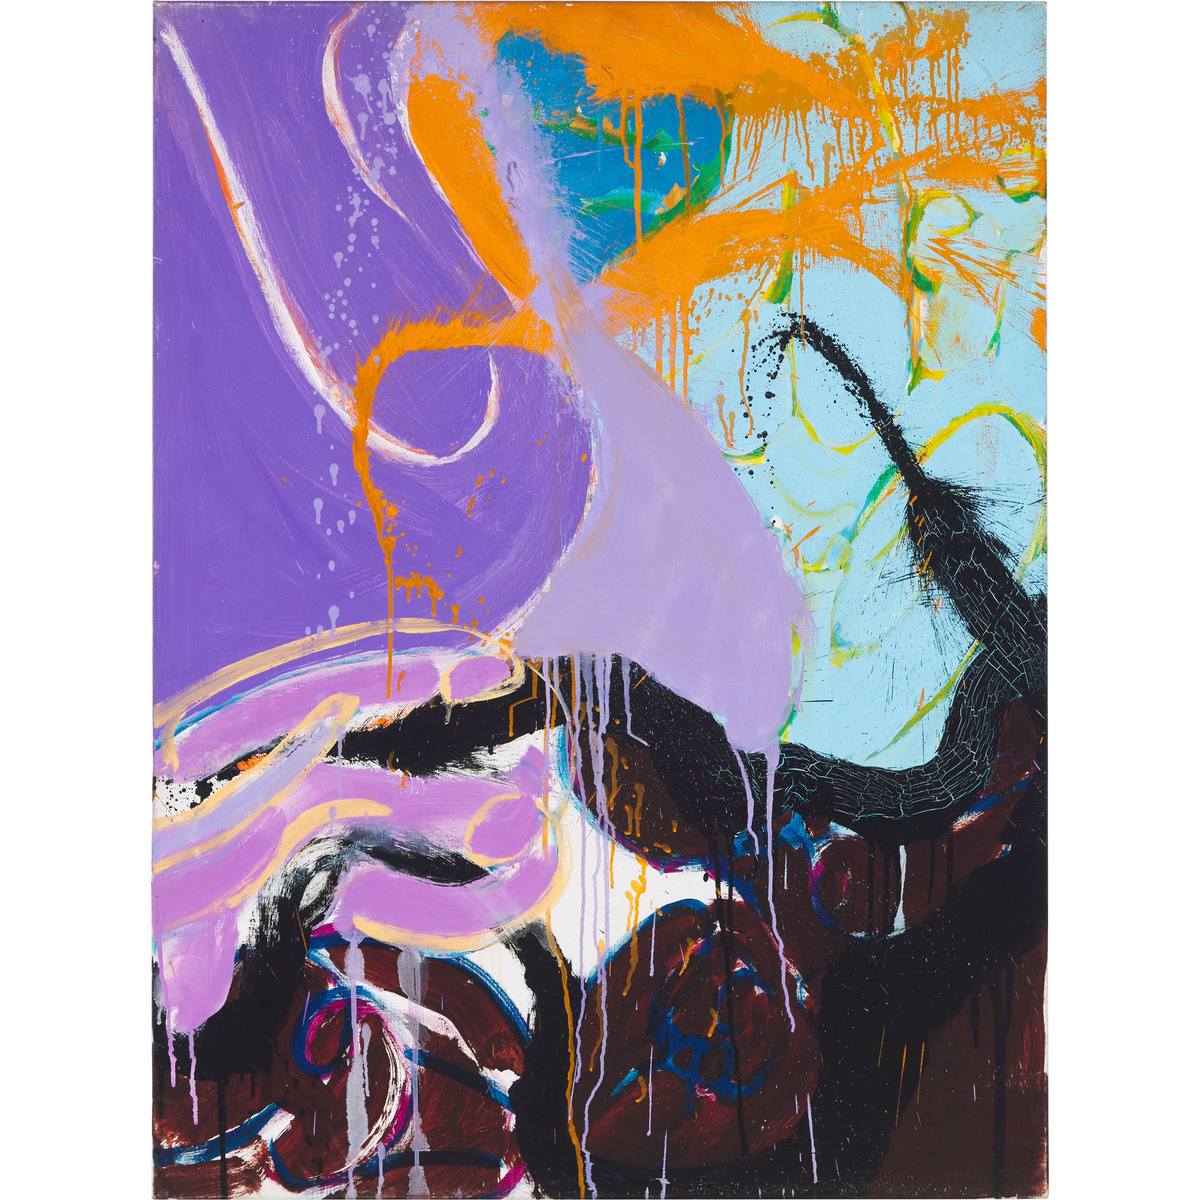 Norman Bluhm (1921-1999), SLEEPING GODDESS, 1983, each panel signed and dated "'83" verso, 40 x 90 i - Image 2 of 10